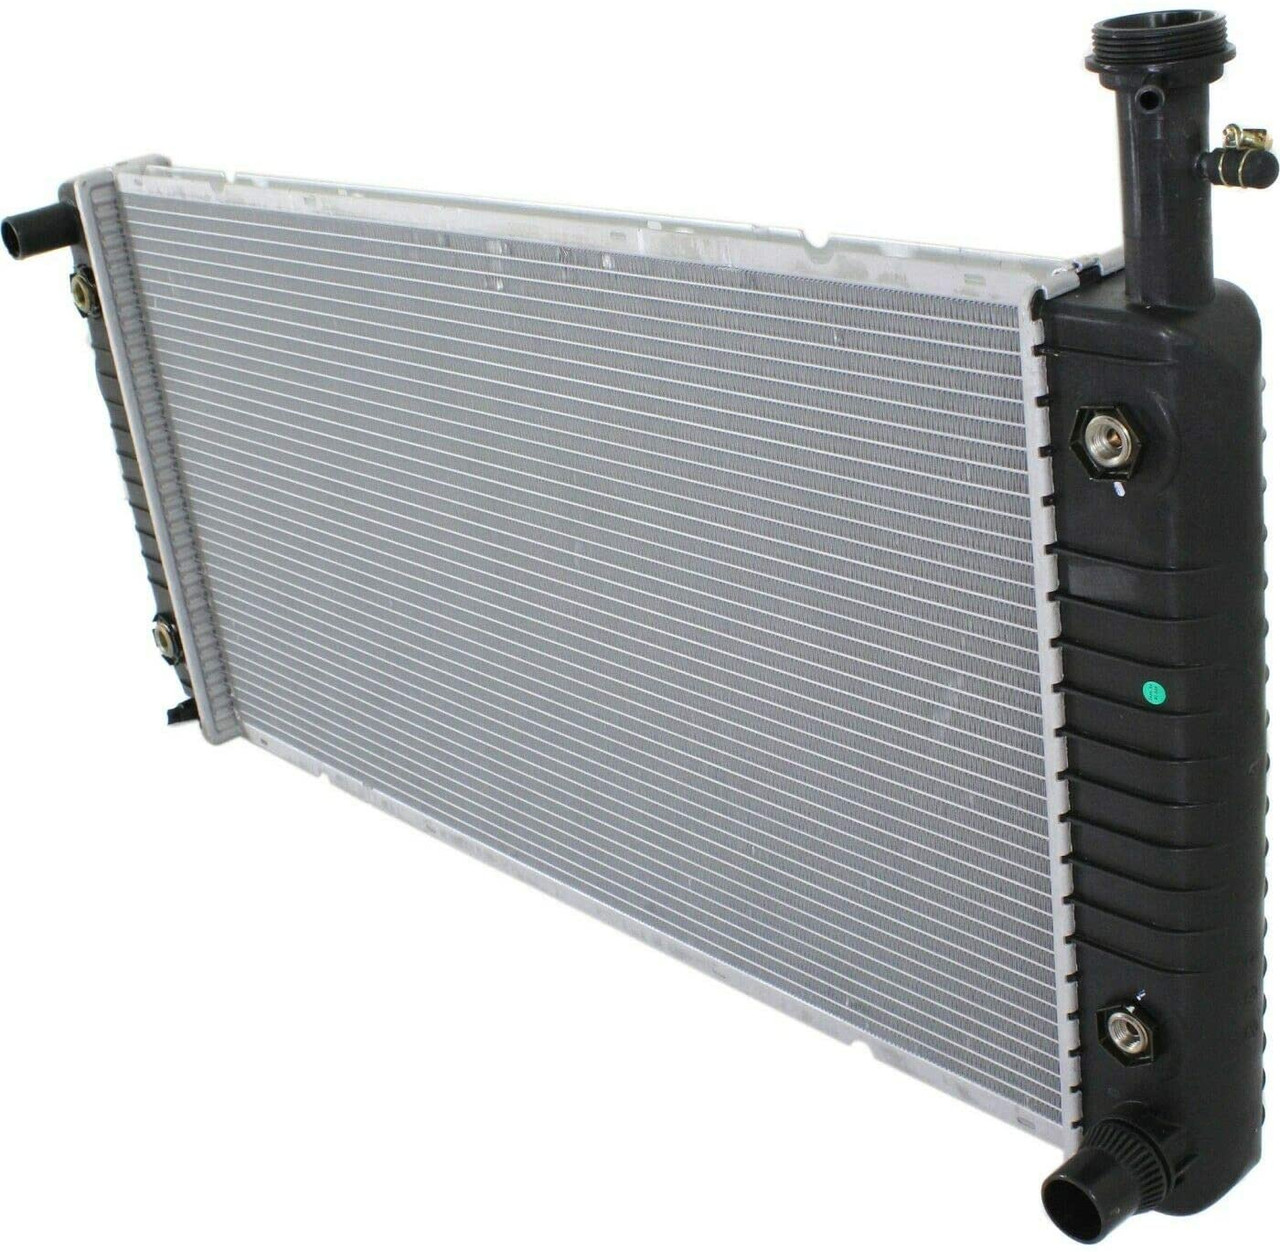 Radiator 4.8L/6.0L Engine With Eoc Without Sensor Hole. Replacement For No. GM3010479